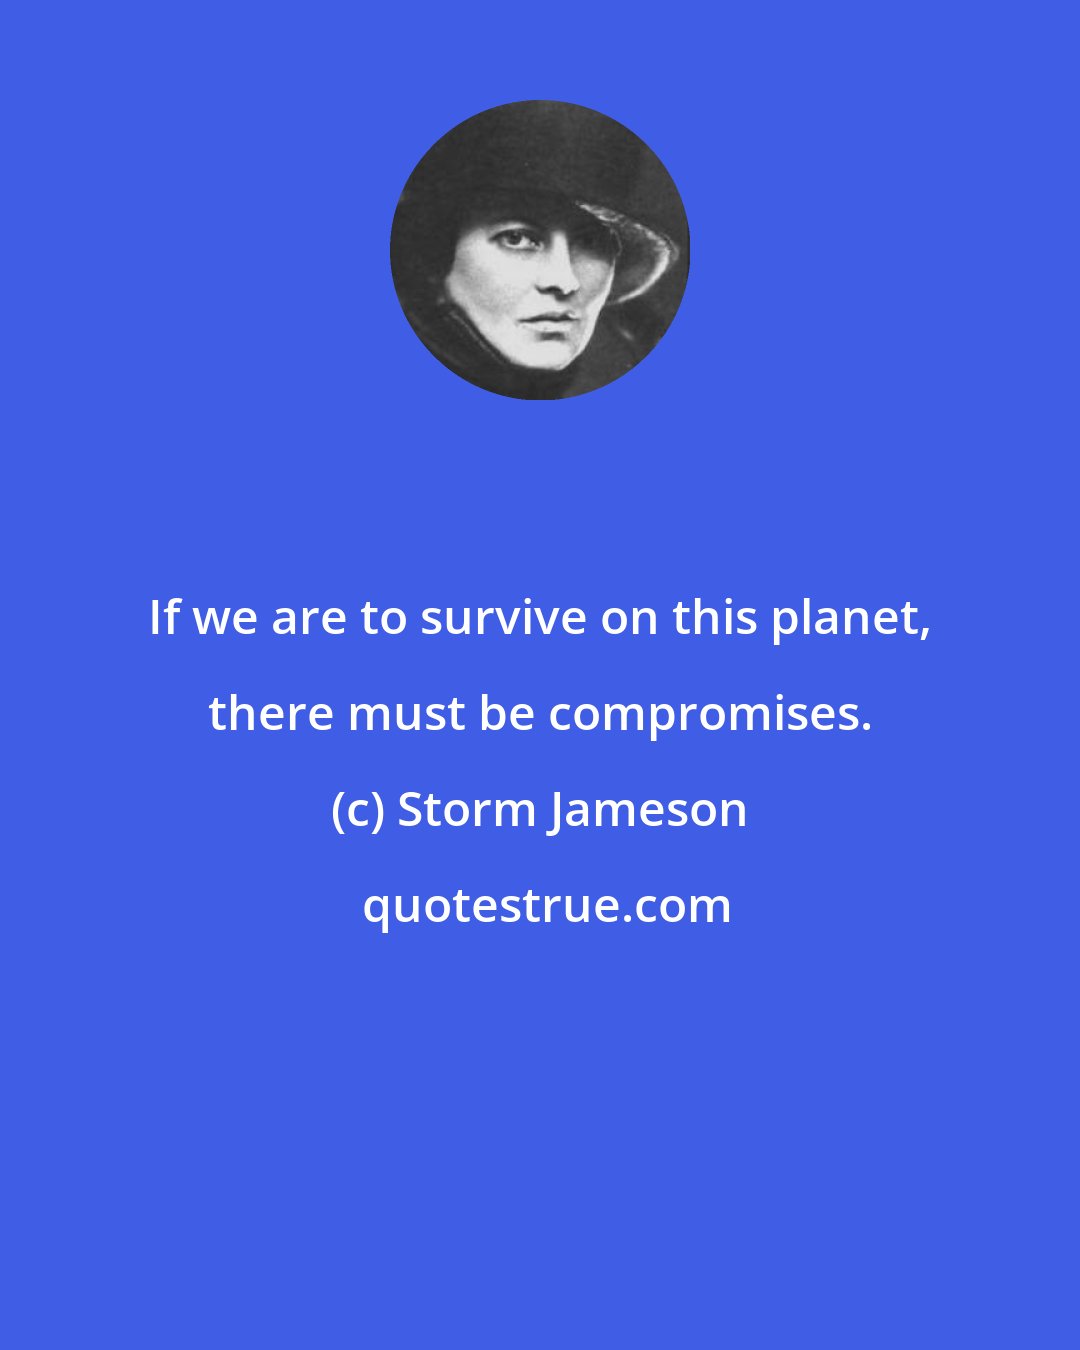 Storm Jameson: If we are to survive on this planet, there must be compromises.